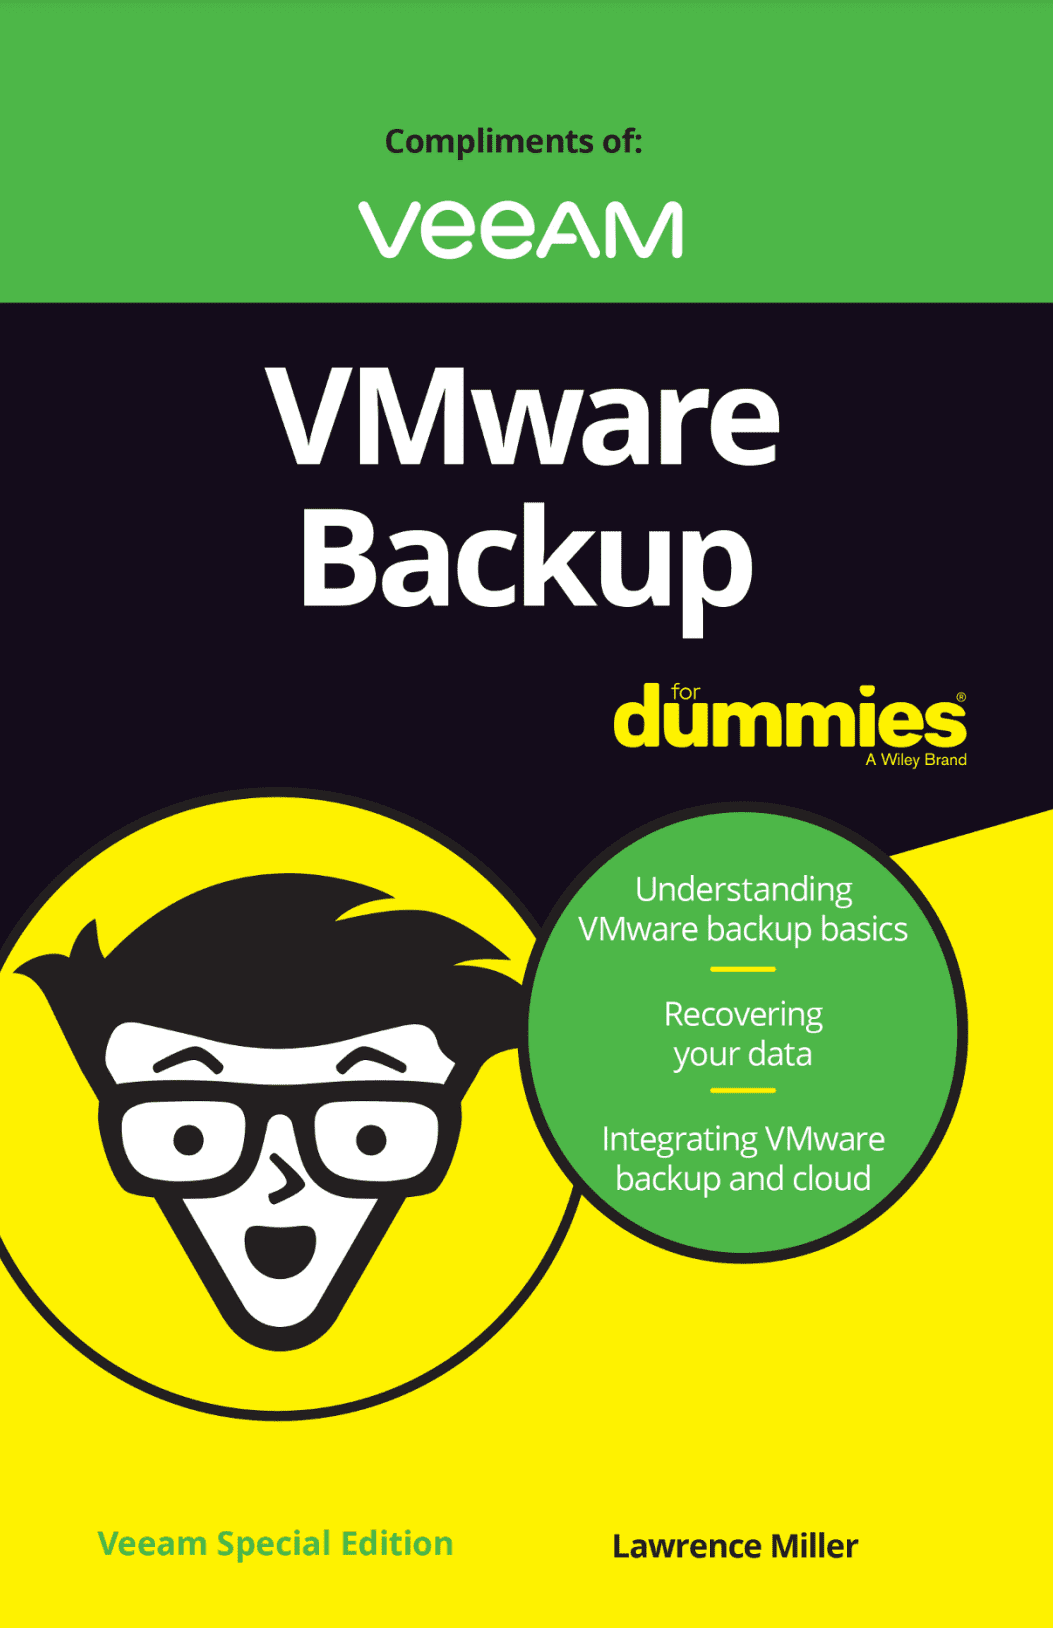 Pic.1 VMware Backup For Dummies